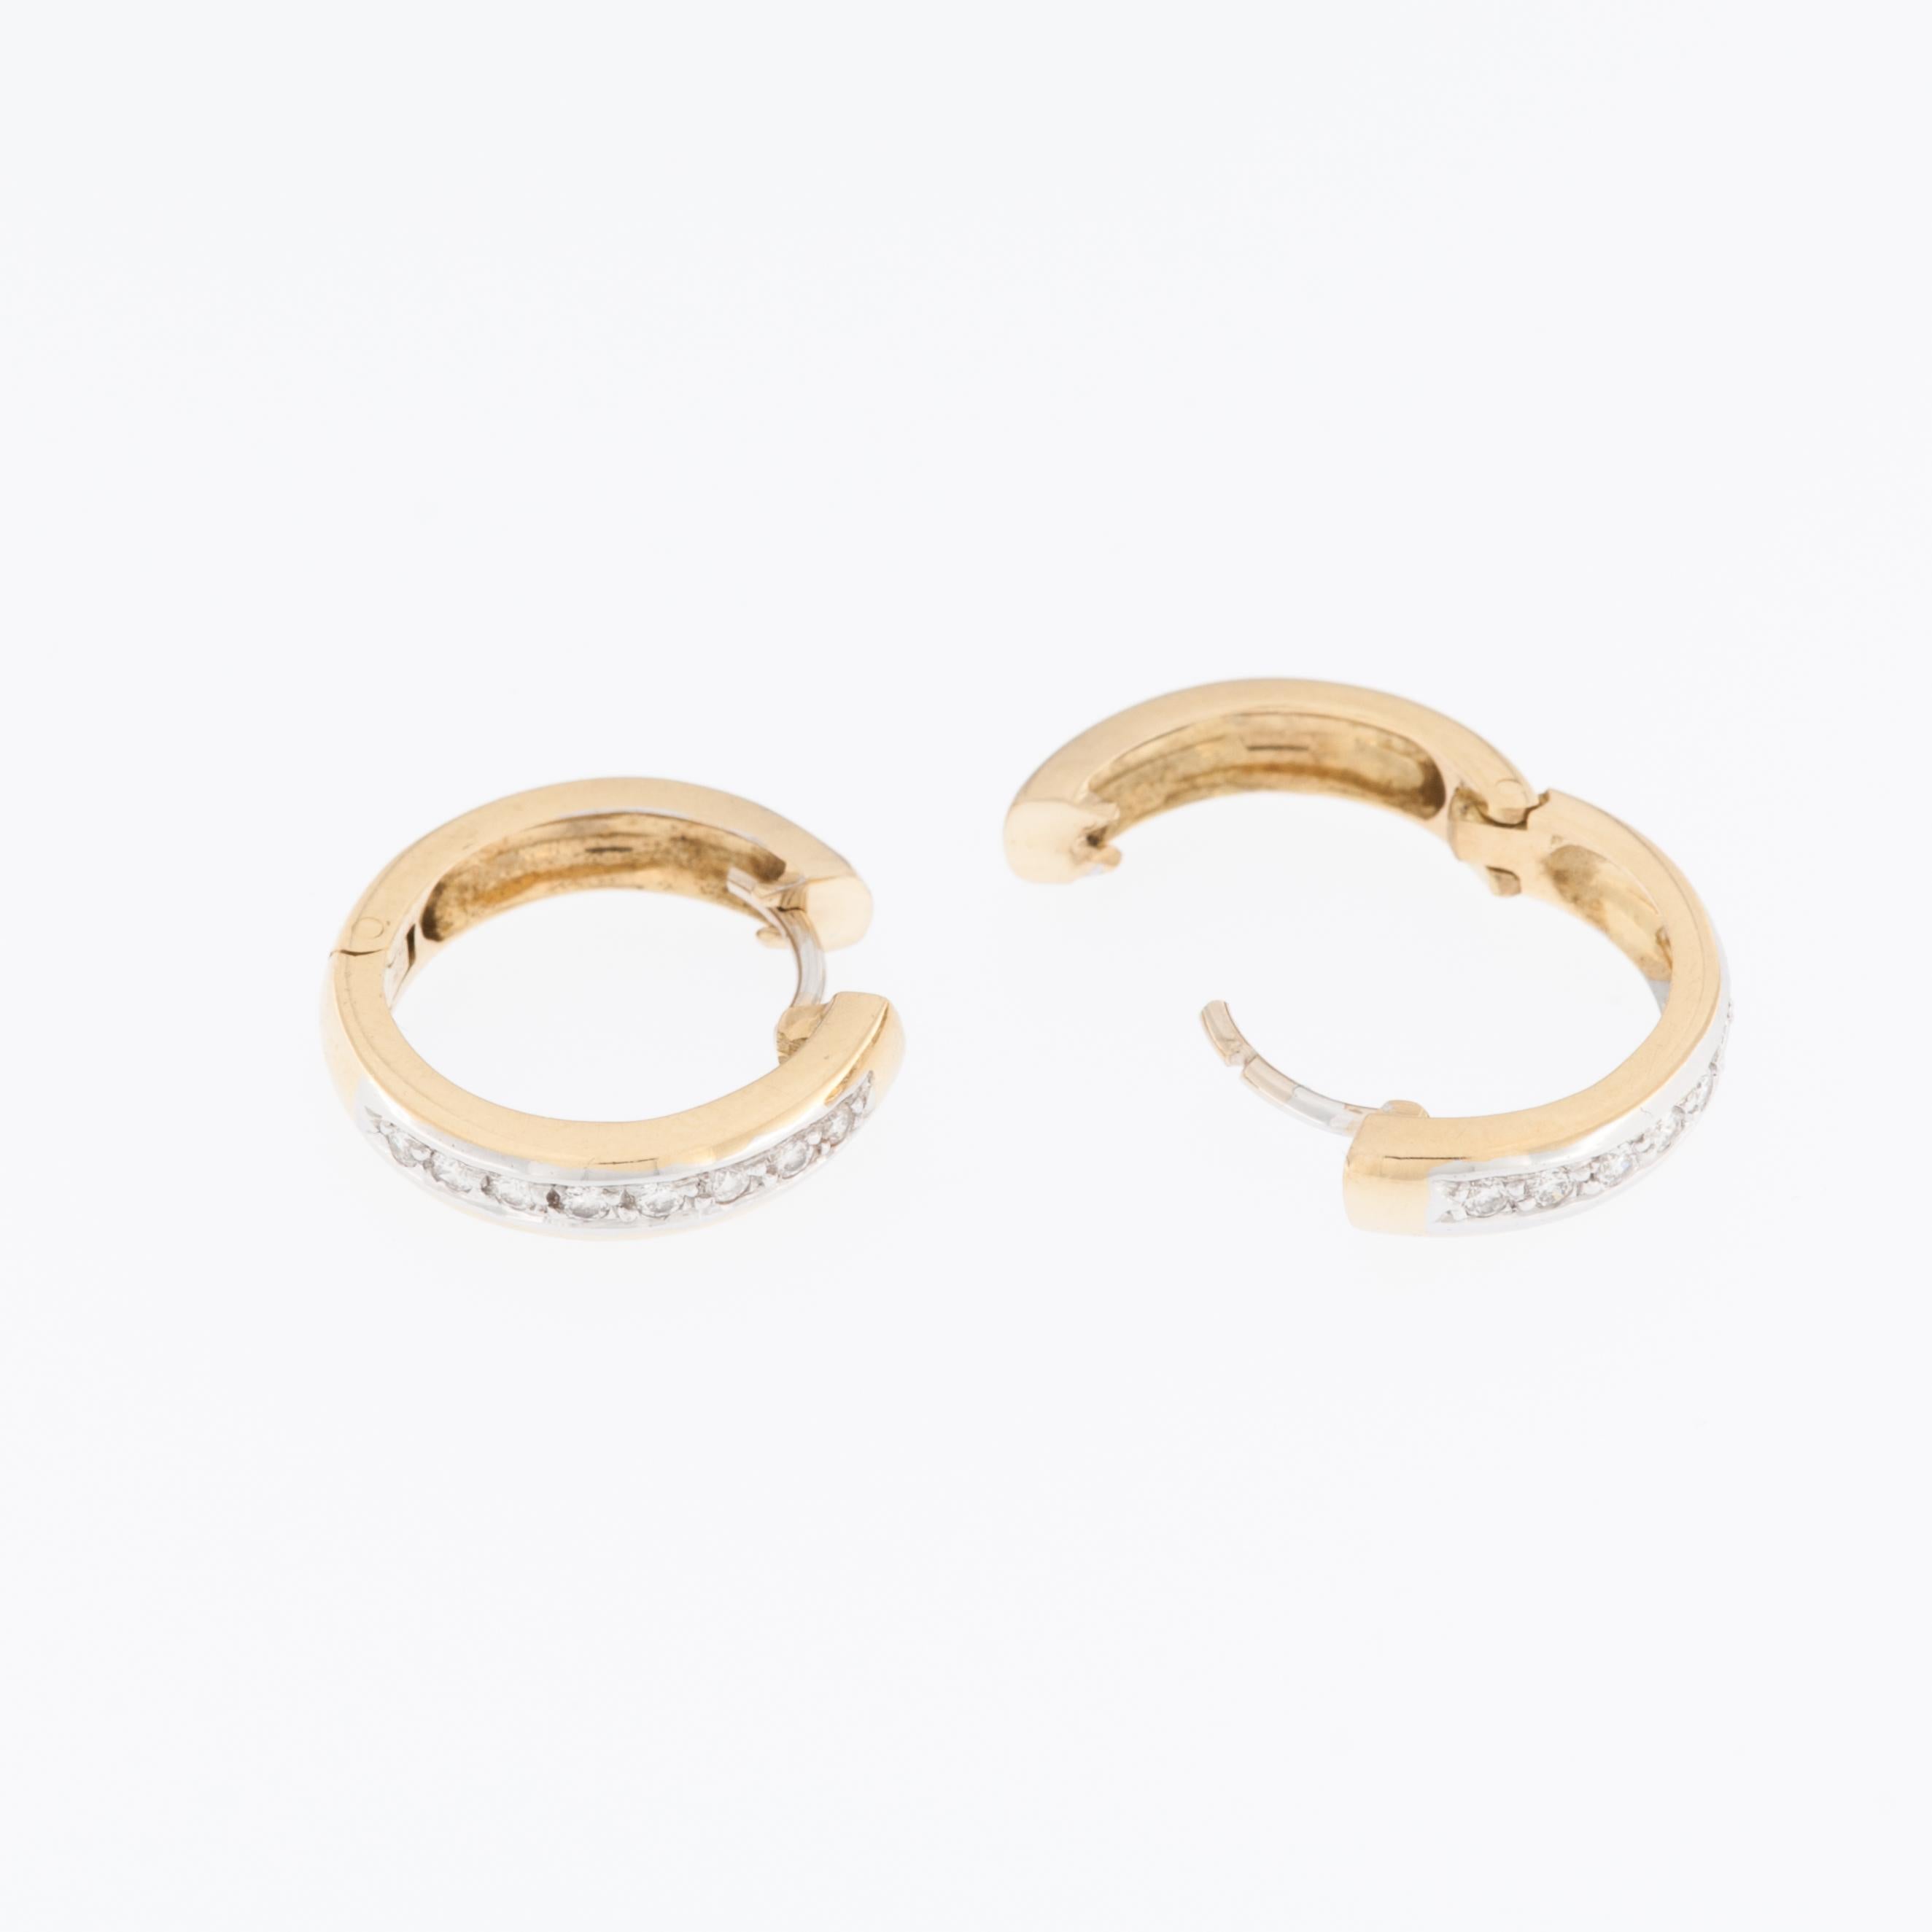 These Belgian Modern 18kt Yellow and White Gold Earrings with Diamonds are a stunning piece of jewelry that combines craftsmanship, elegance, and luxury. 

The earrings are crafted from high-quality 18-karat yellow and white gold, showcasing a